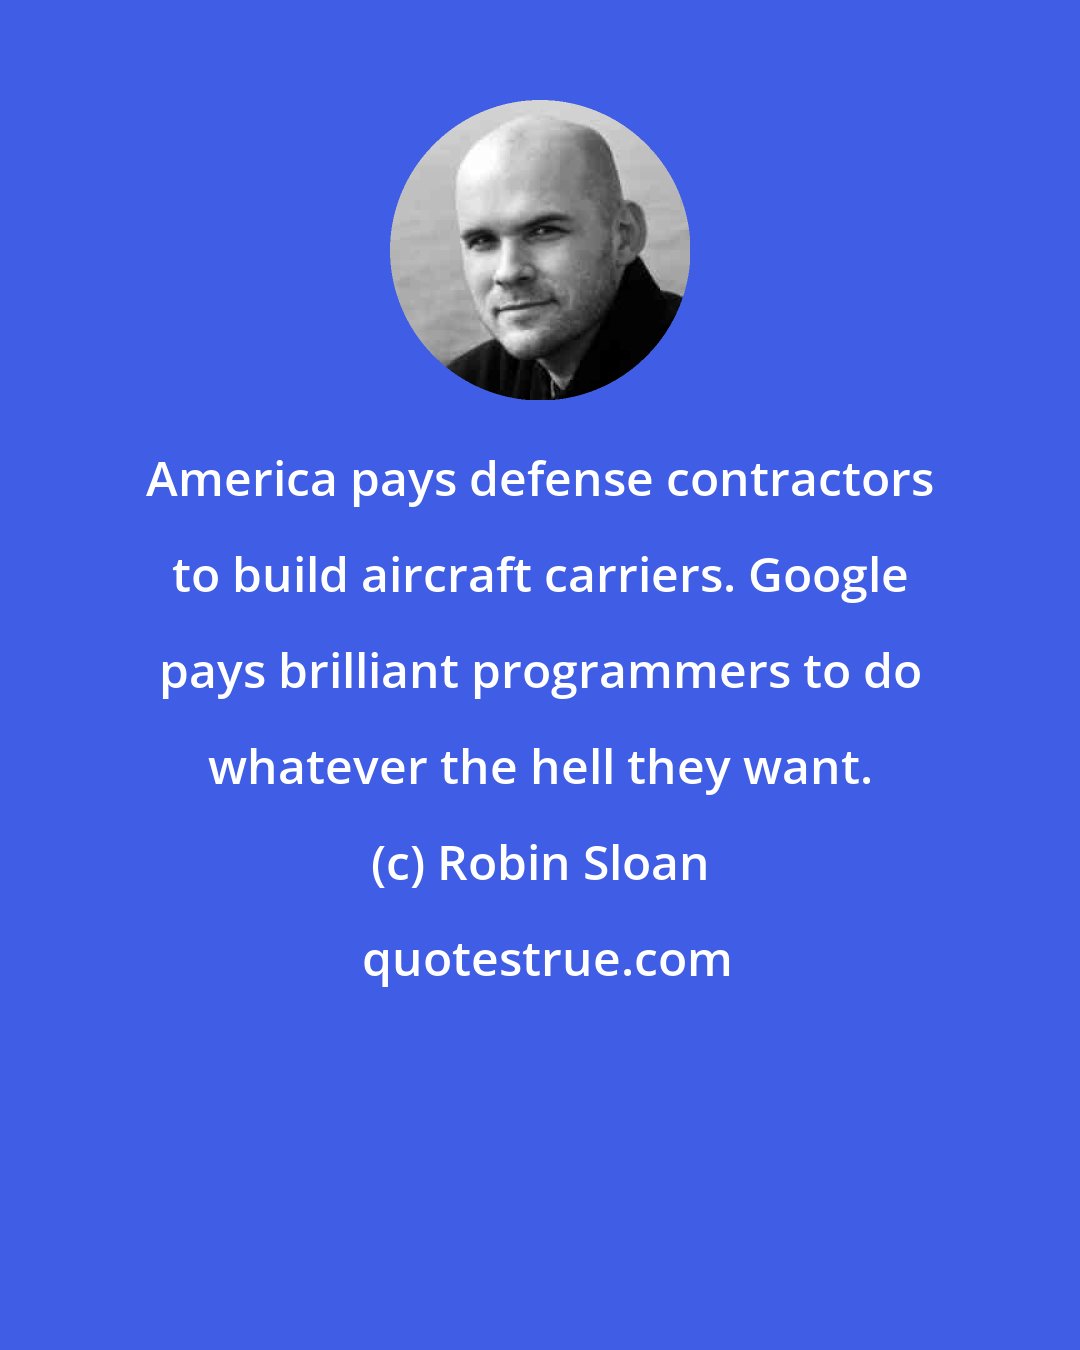 Robin Sloan: America pays defense contractors to build aircraft carriers. Google pays brilliant programmers to do whatever the hell they want.